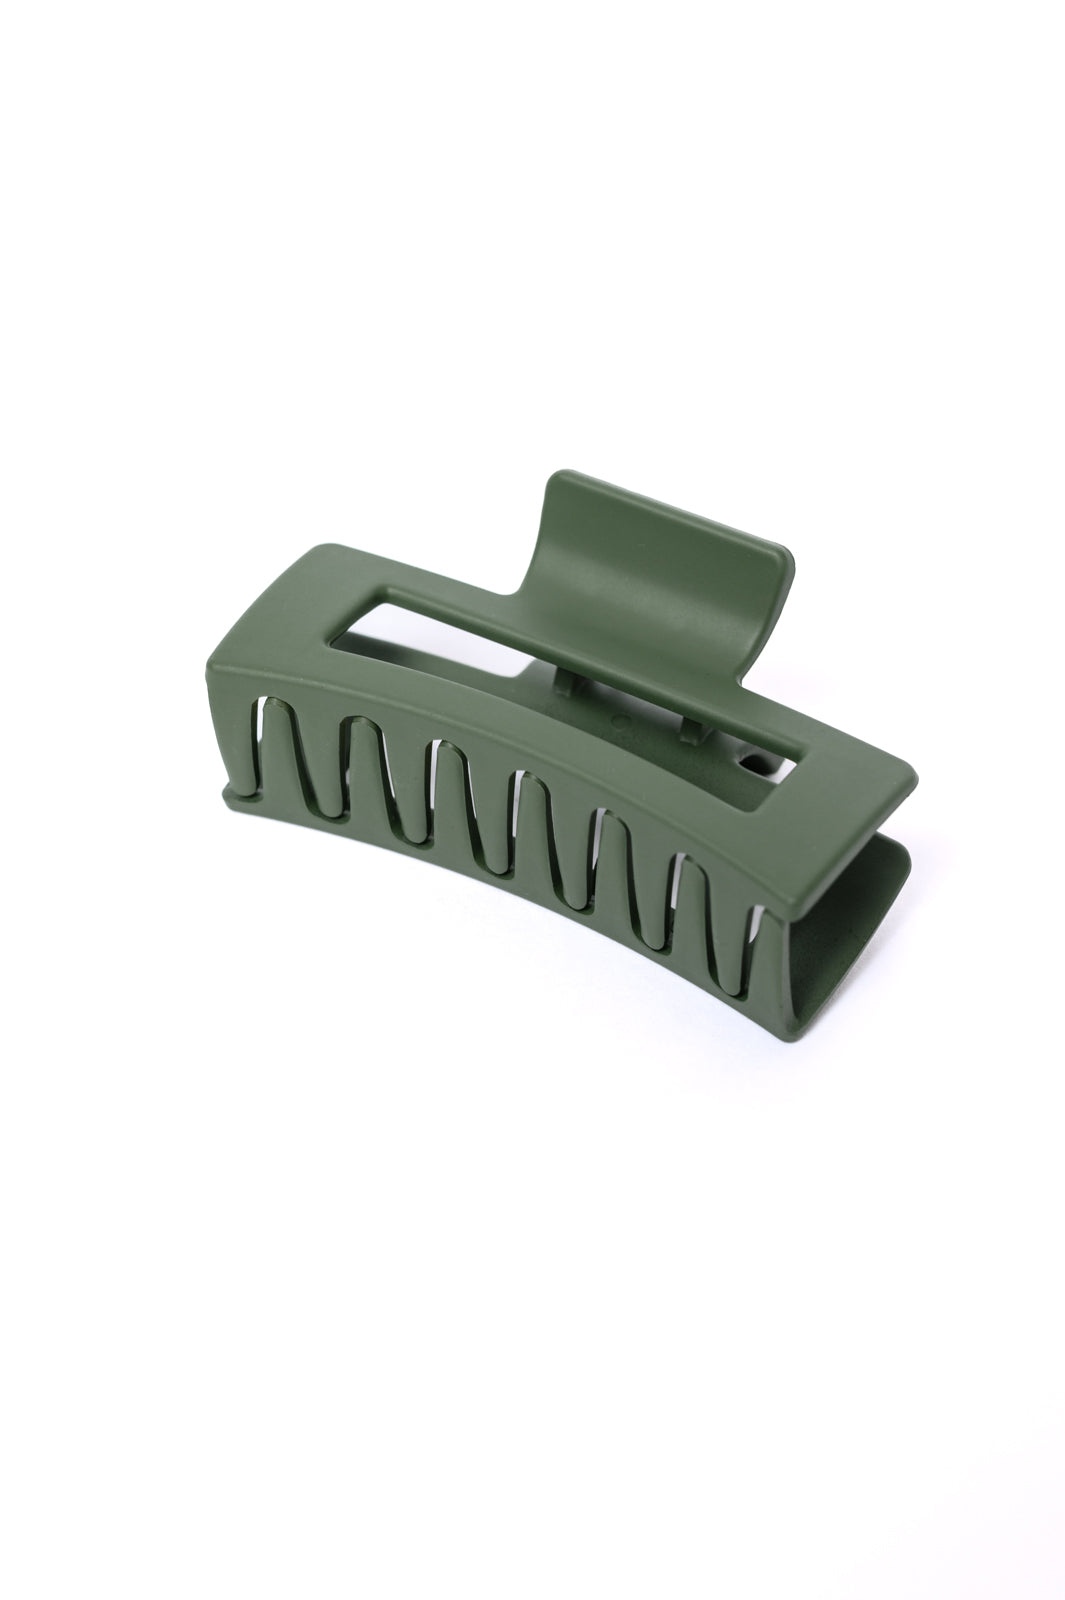 Claw Clip Set of 4 in Forest Green (Ships in 1-2 Weeks)